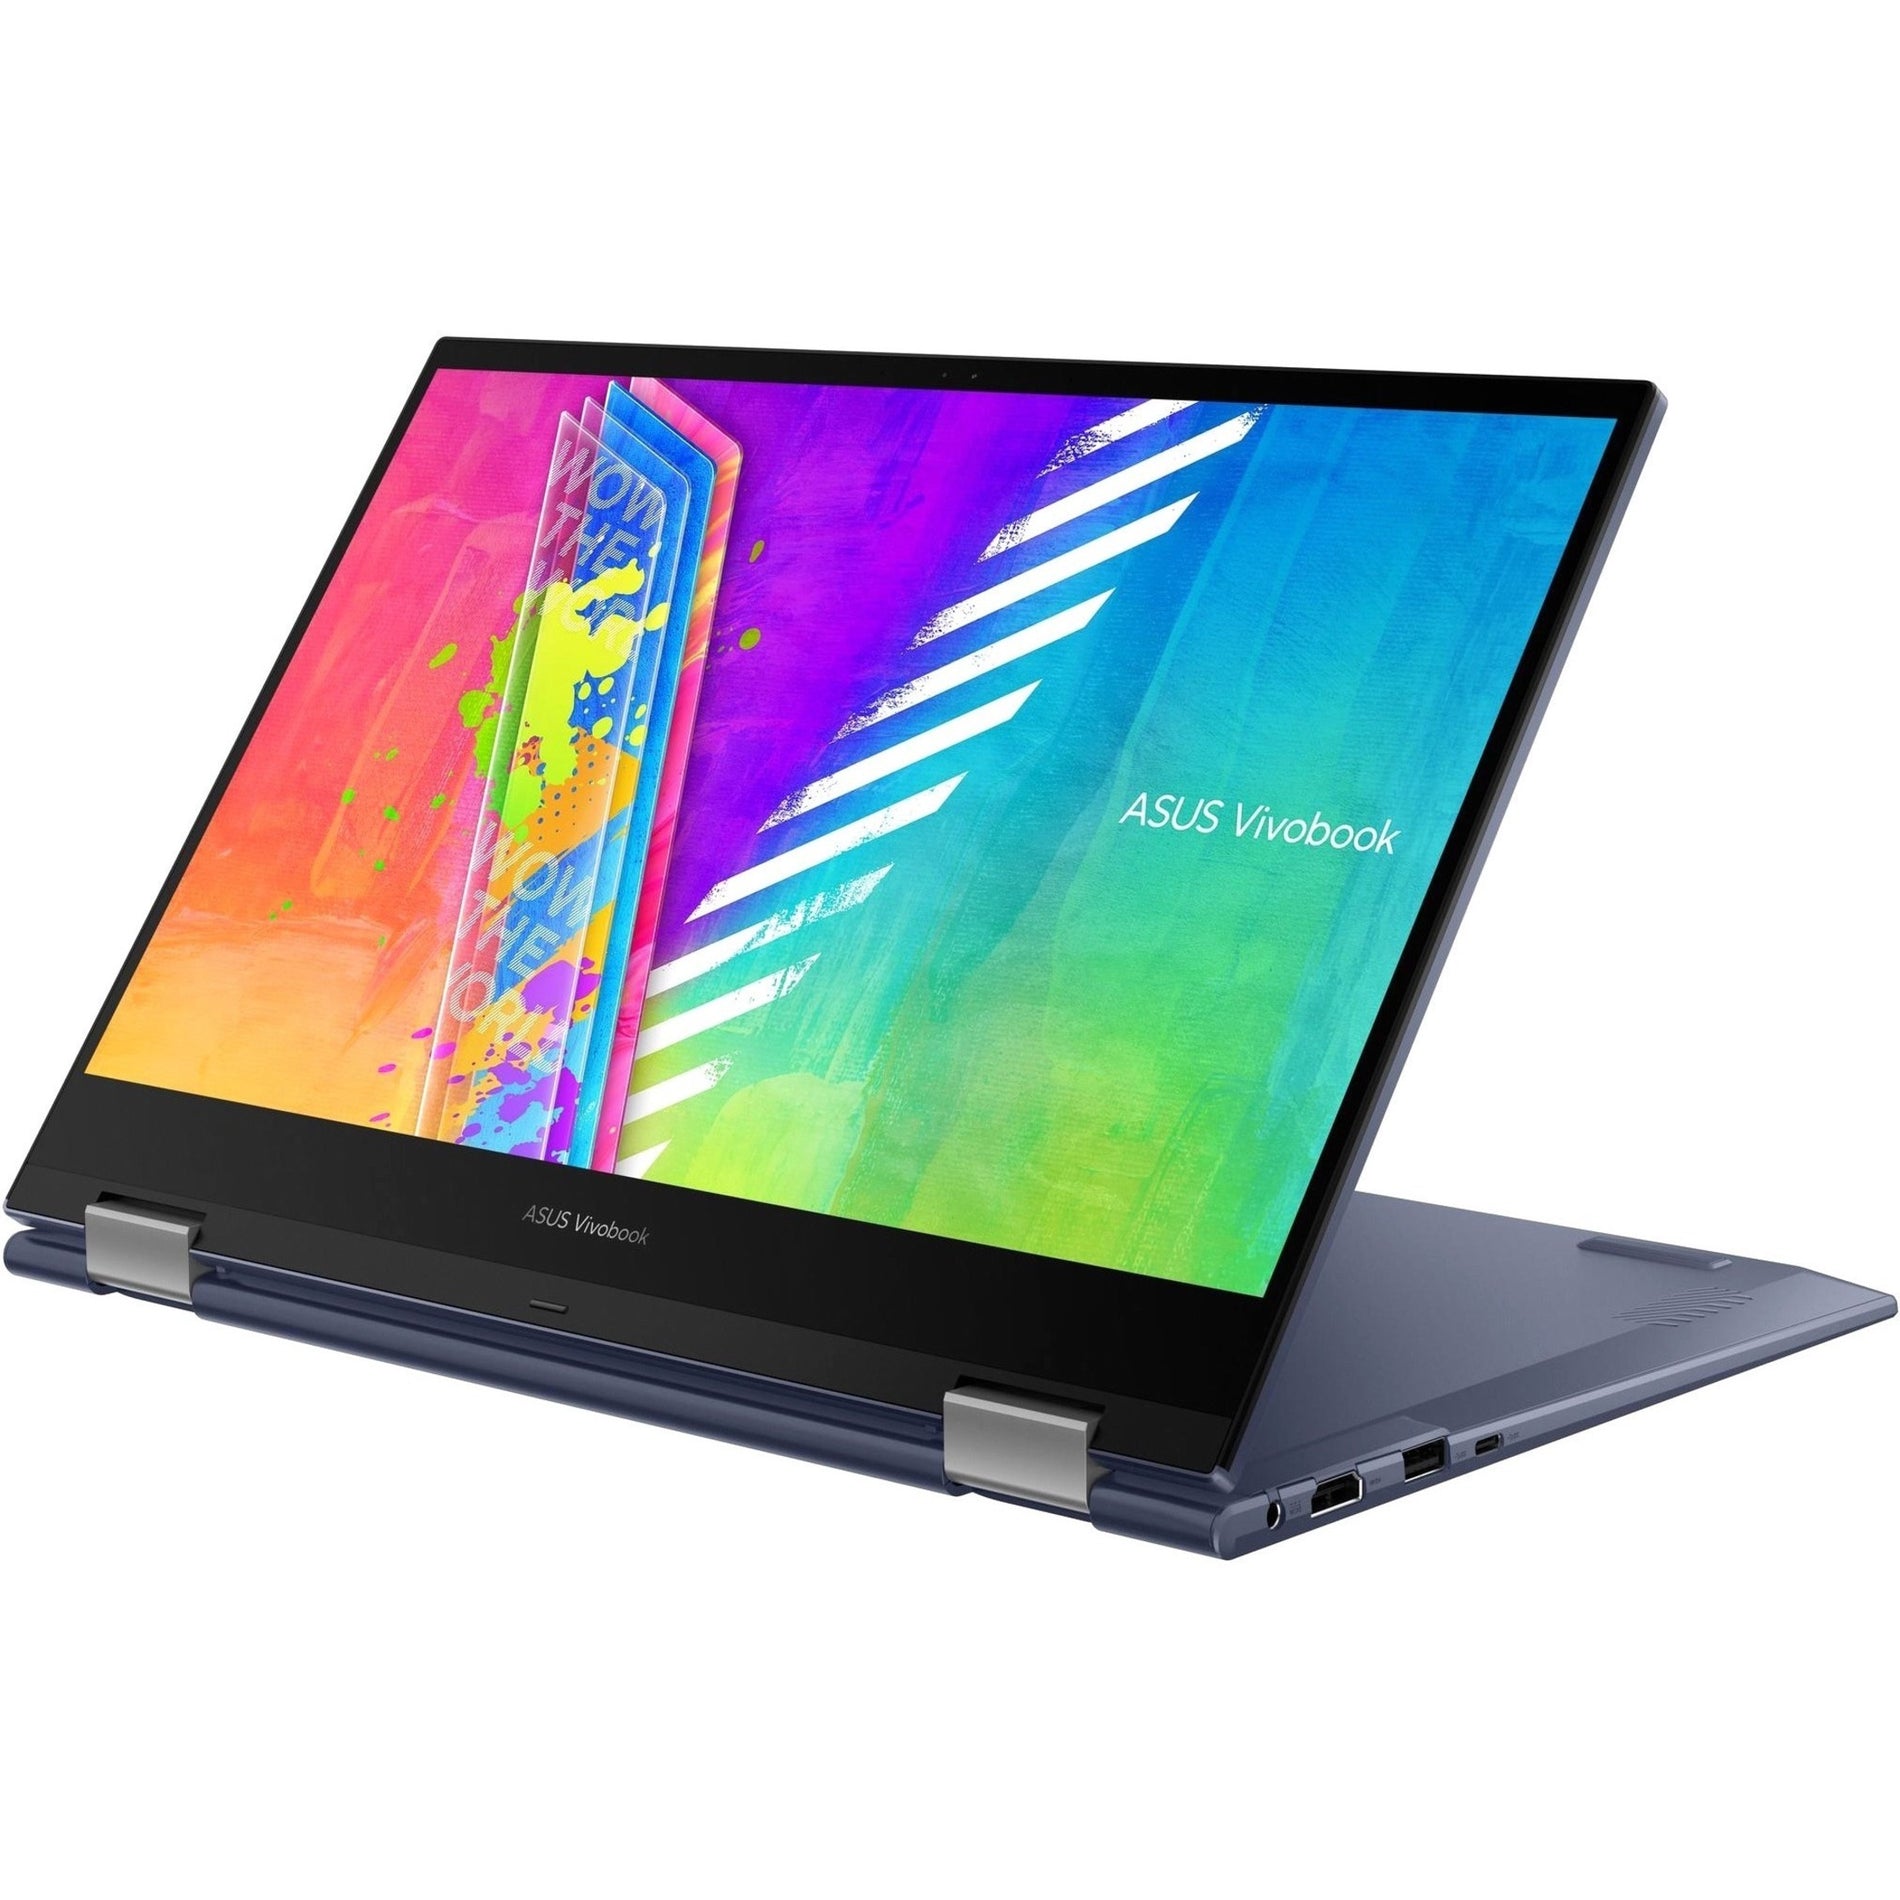 Vivobook 14 (A1404, 12th Gen Intel)｜Laptops For Home｜ASUS Malaysia